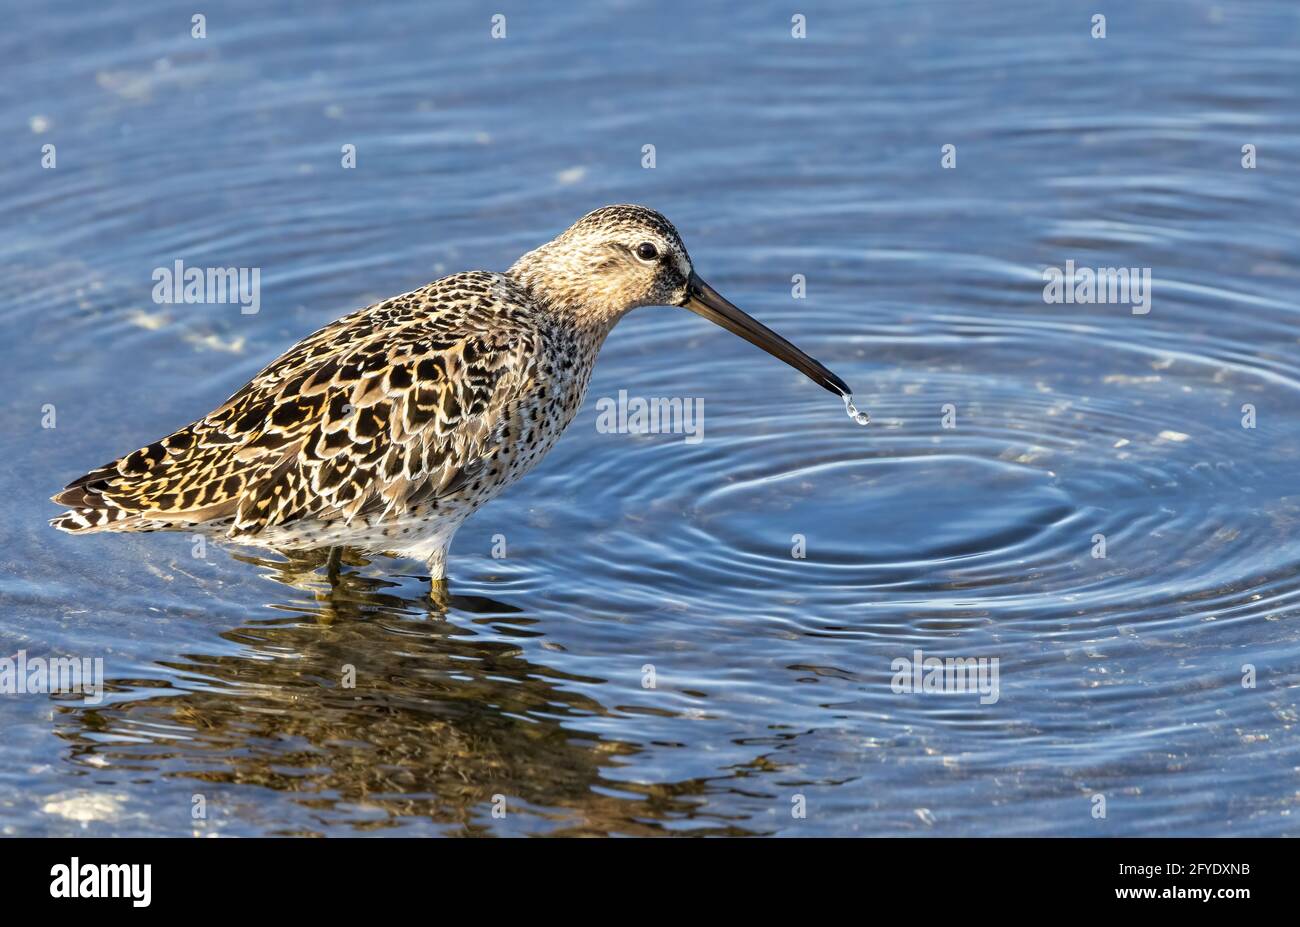 Long-billed dowitcher (Limnodromus scolopaceus) with small fish in beak Stock Photo